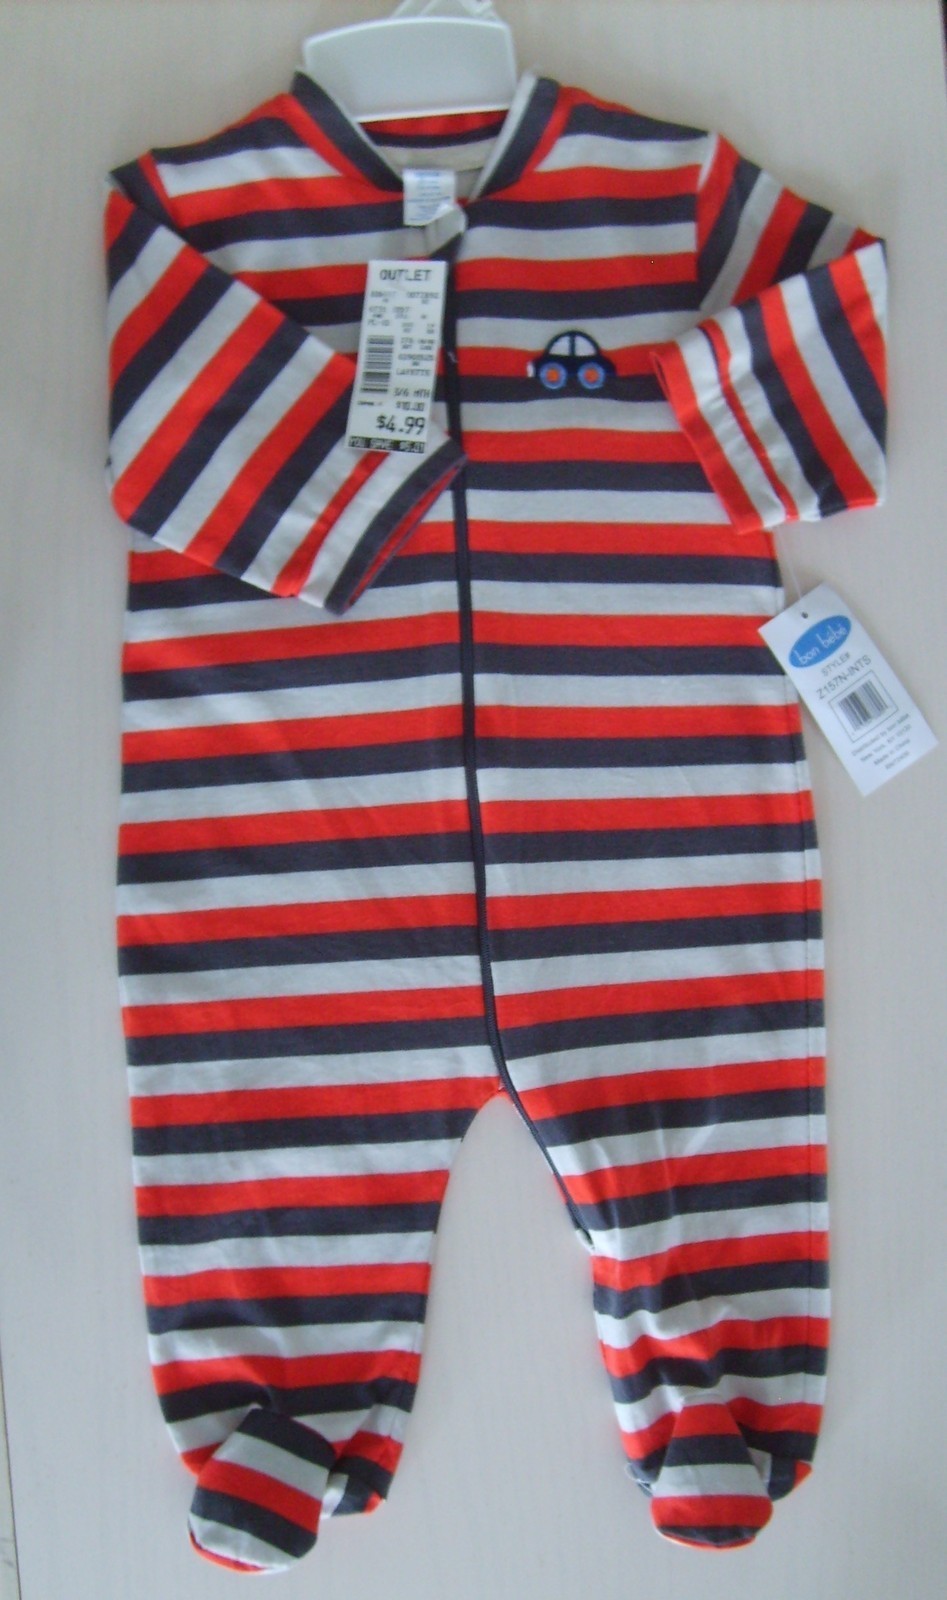 New Bon Bebe One Piece Footed Long Sleeve Medium  Playtime 0-3 months Red Grey - $4.89